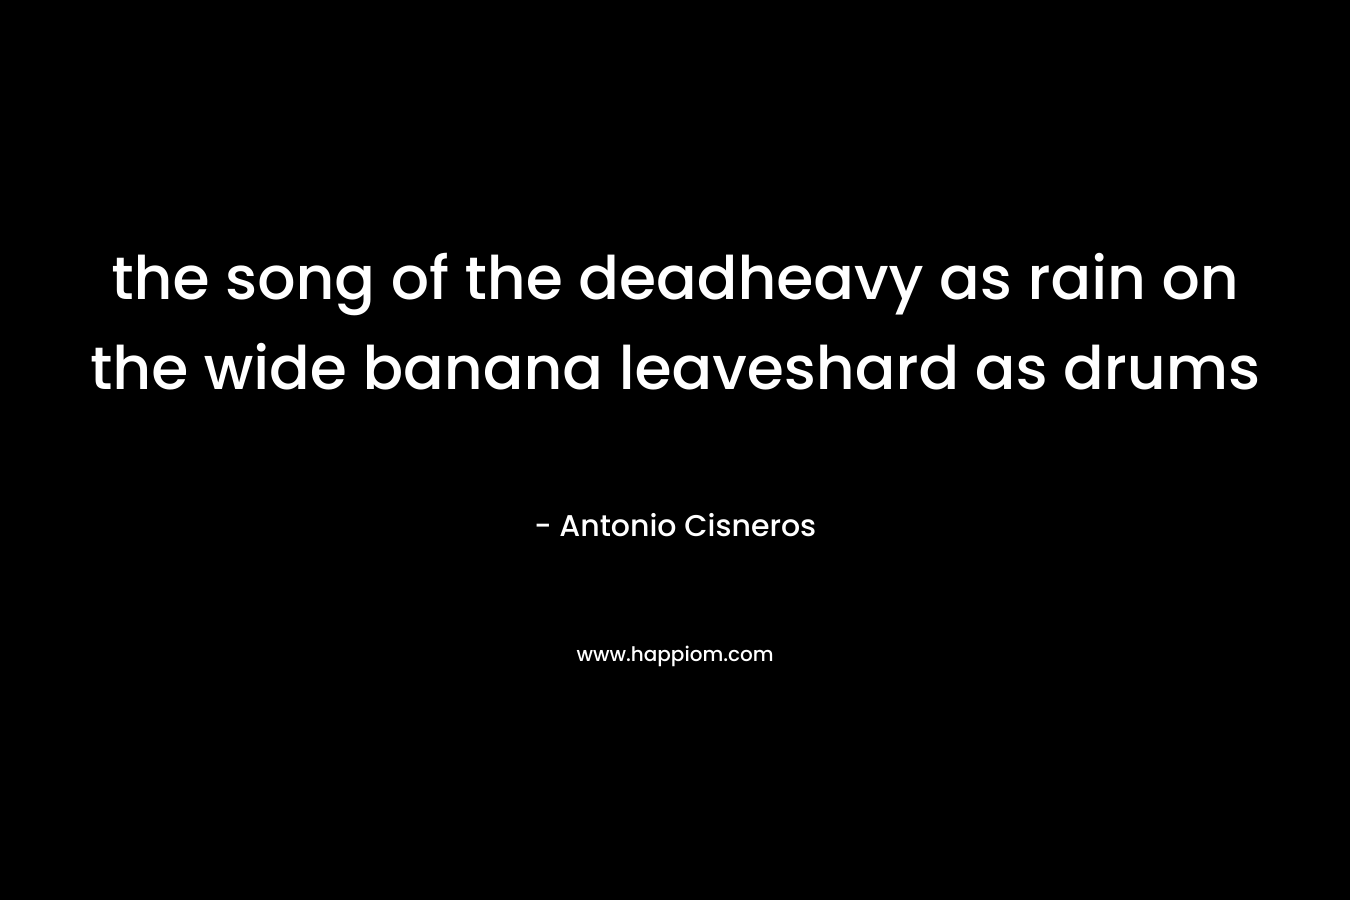 the song of the deadheavy as rain on the wide banana leaveshard as drums